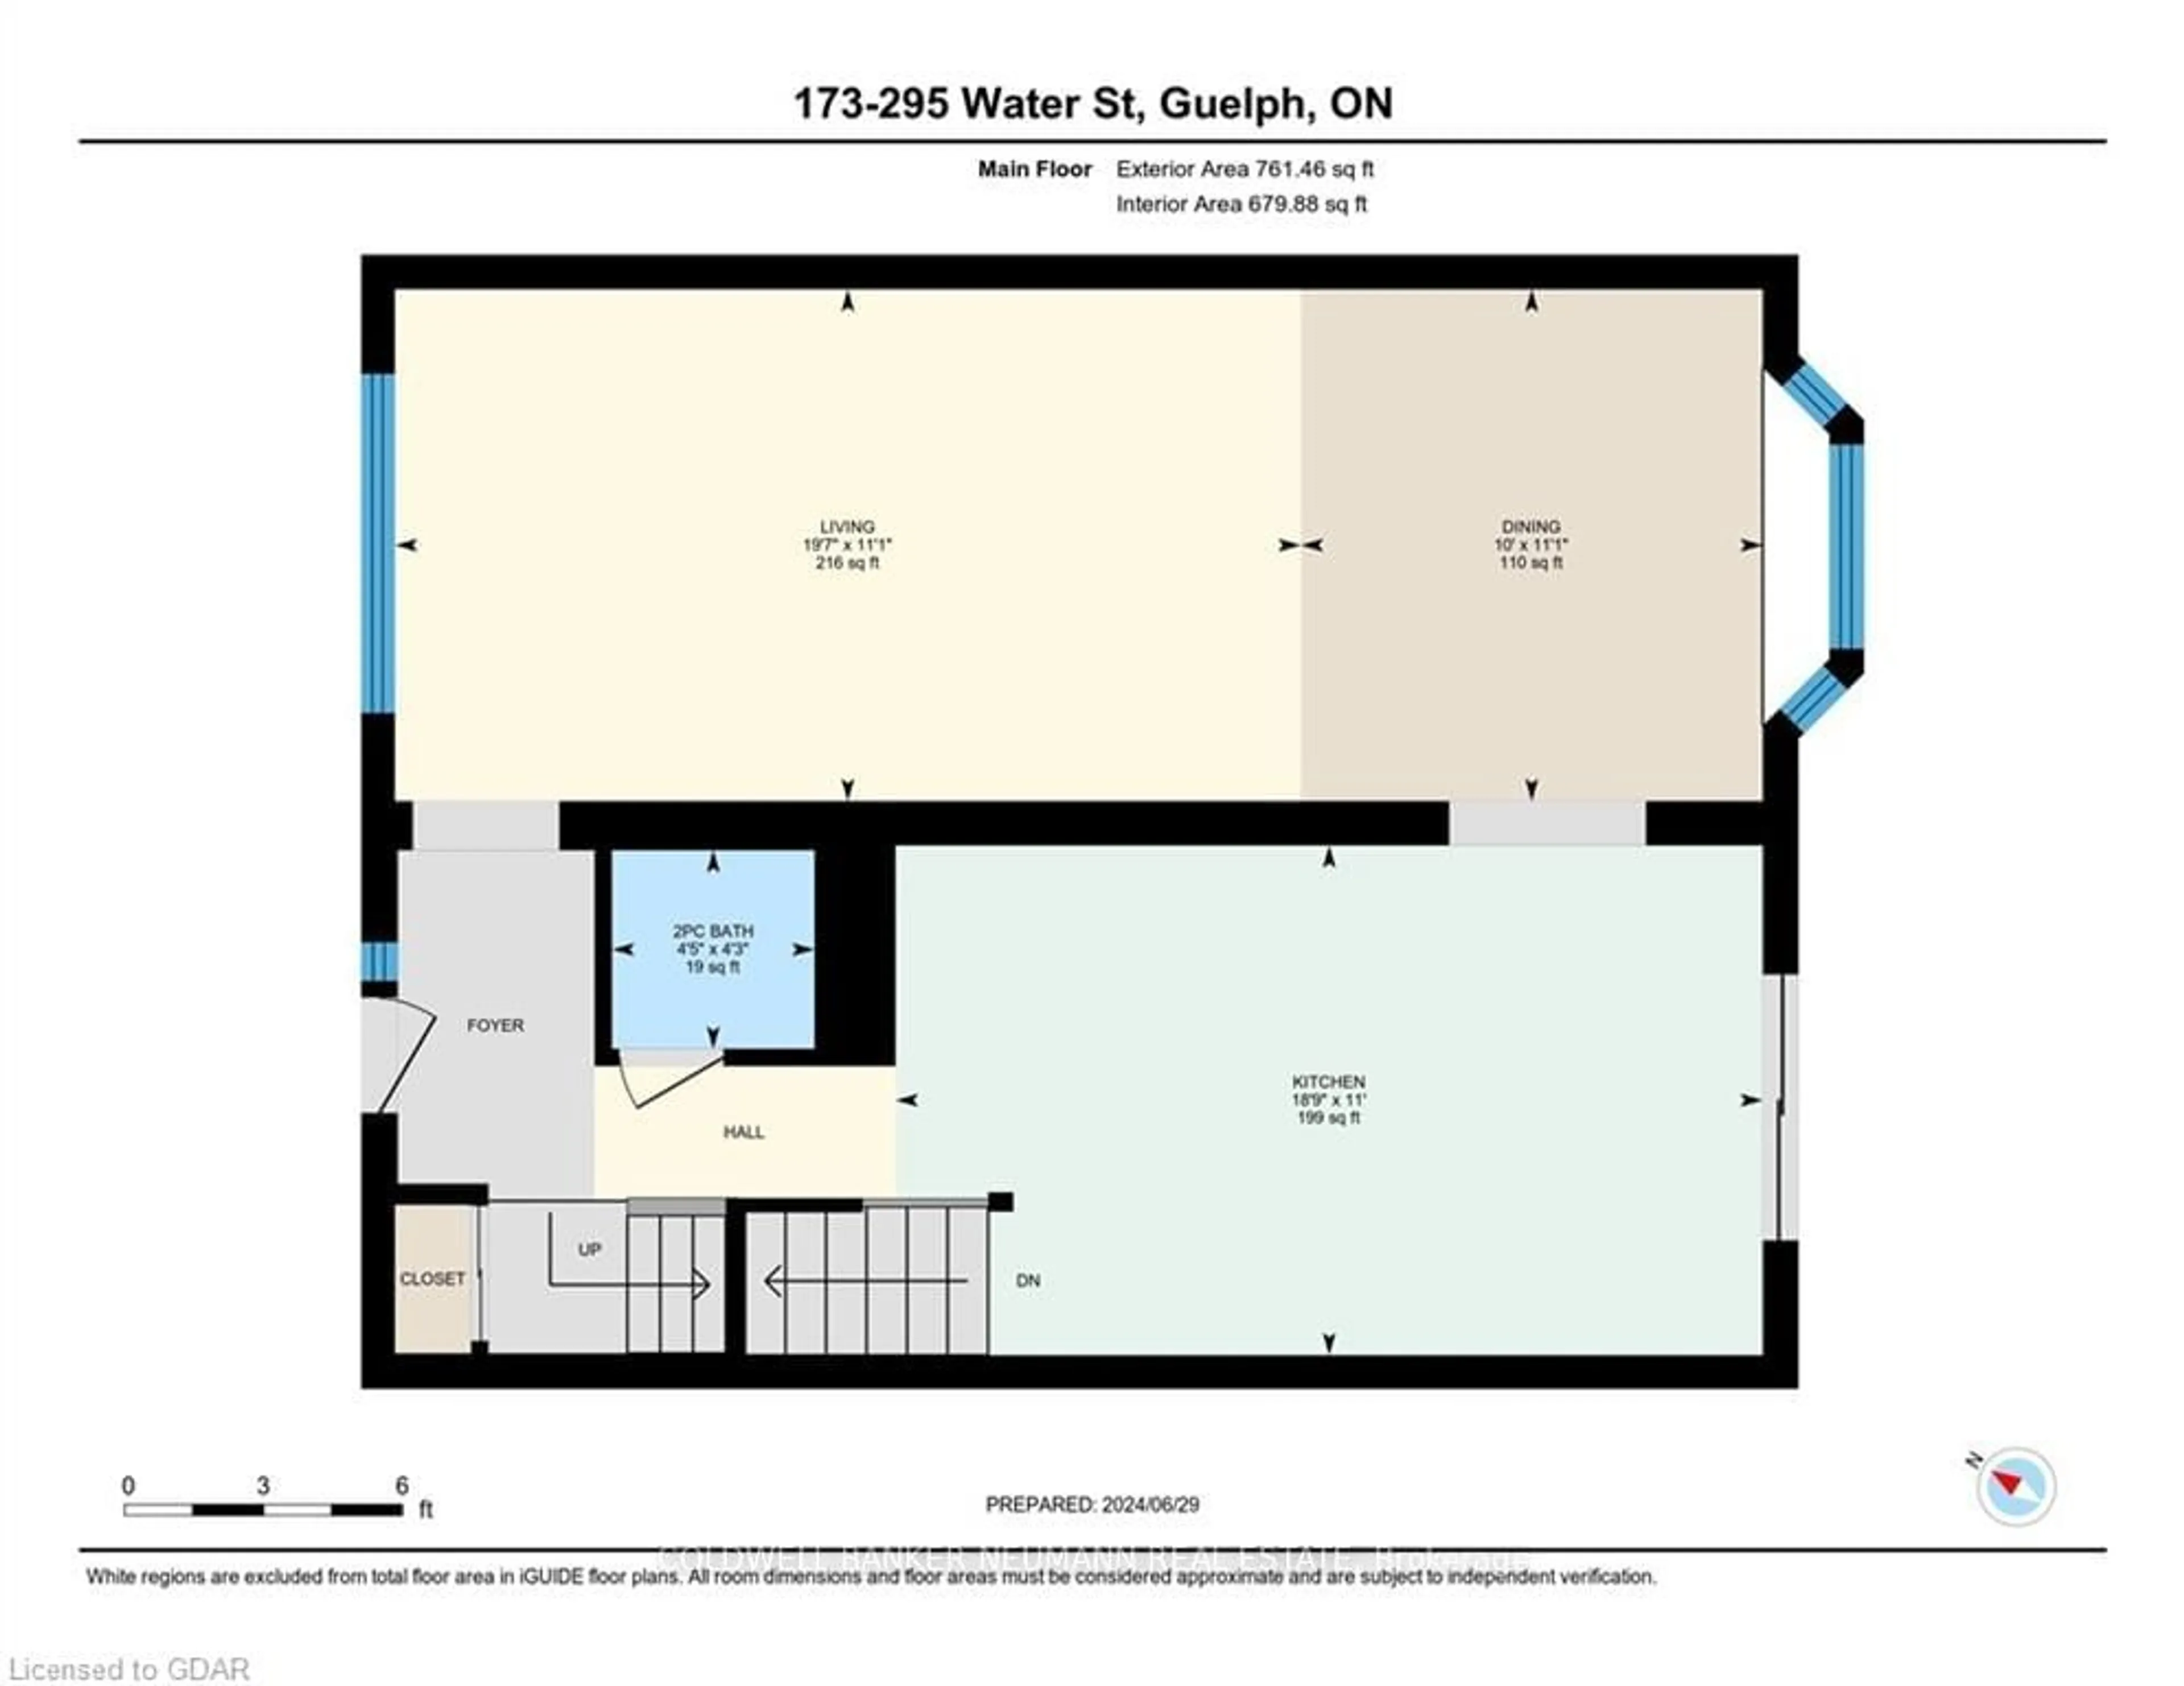 Floor plan for 295 Water St #173, Guelph Ontario N1G 2X5